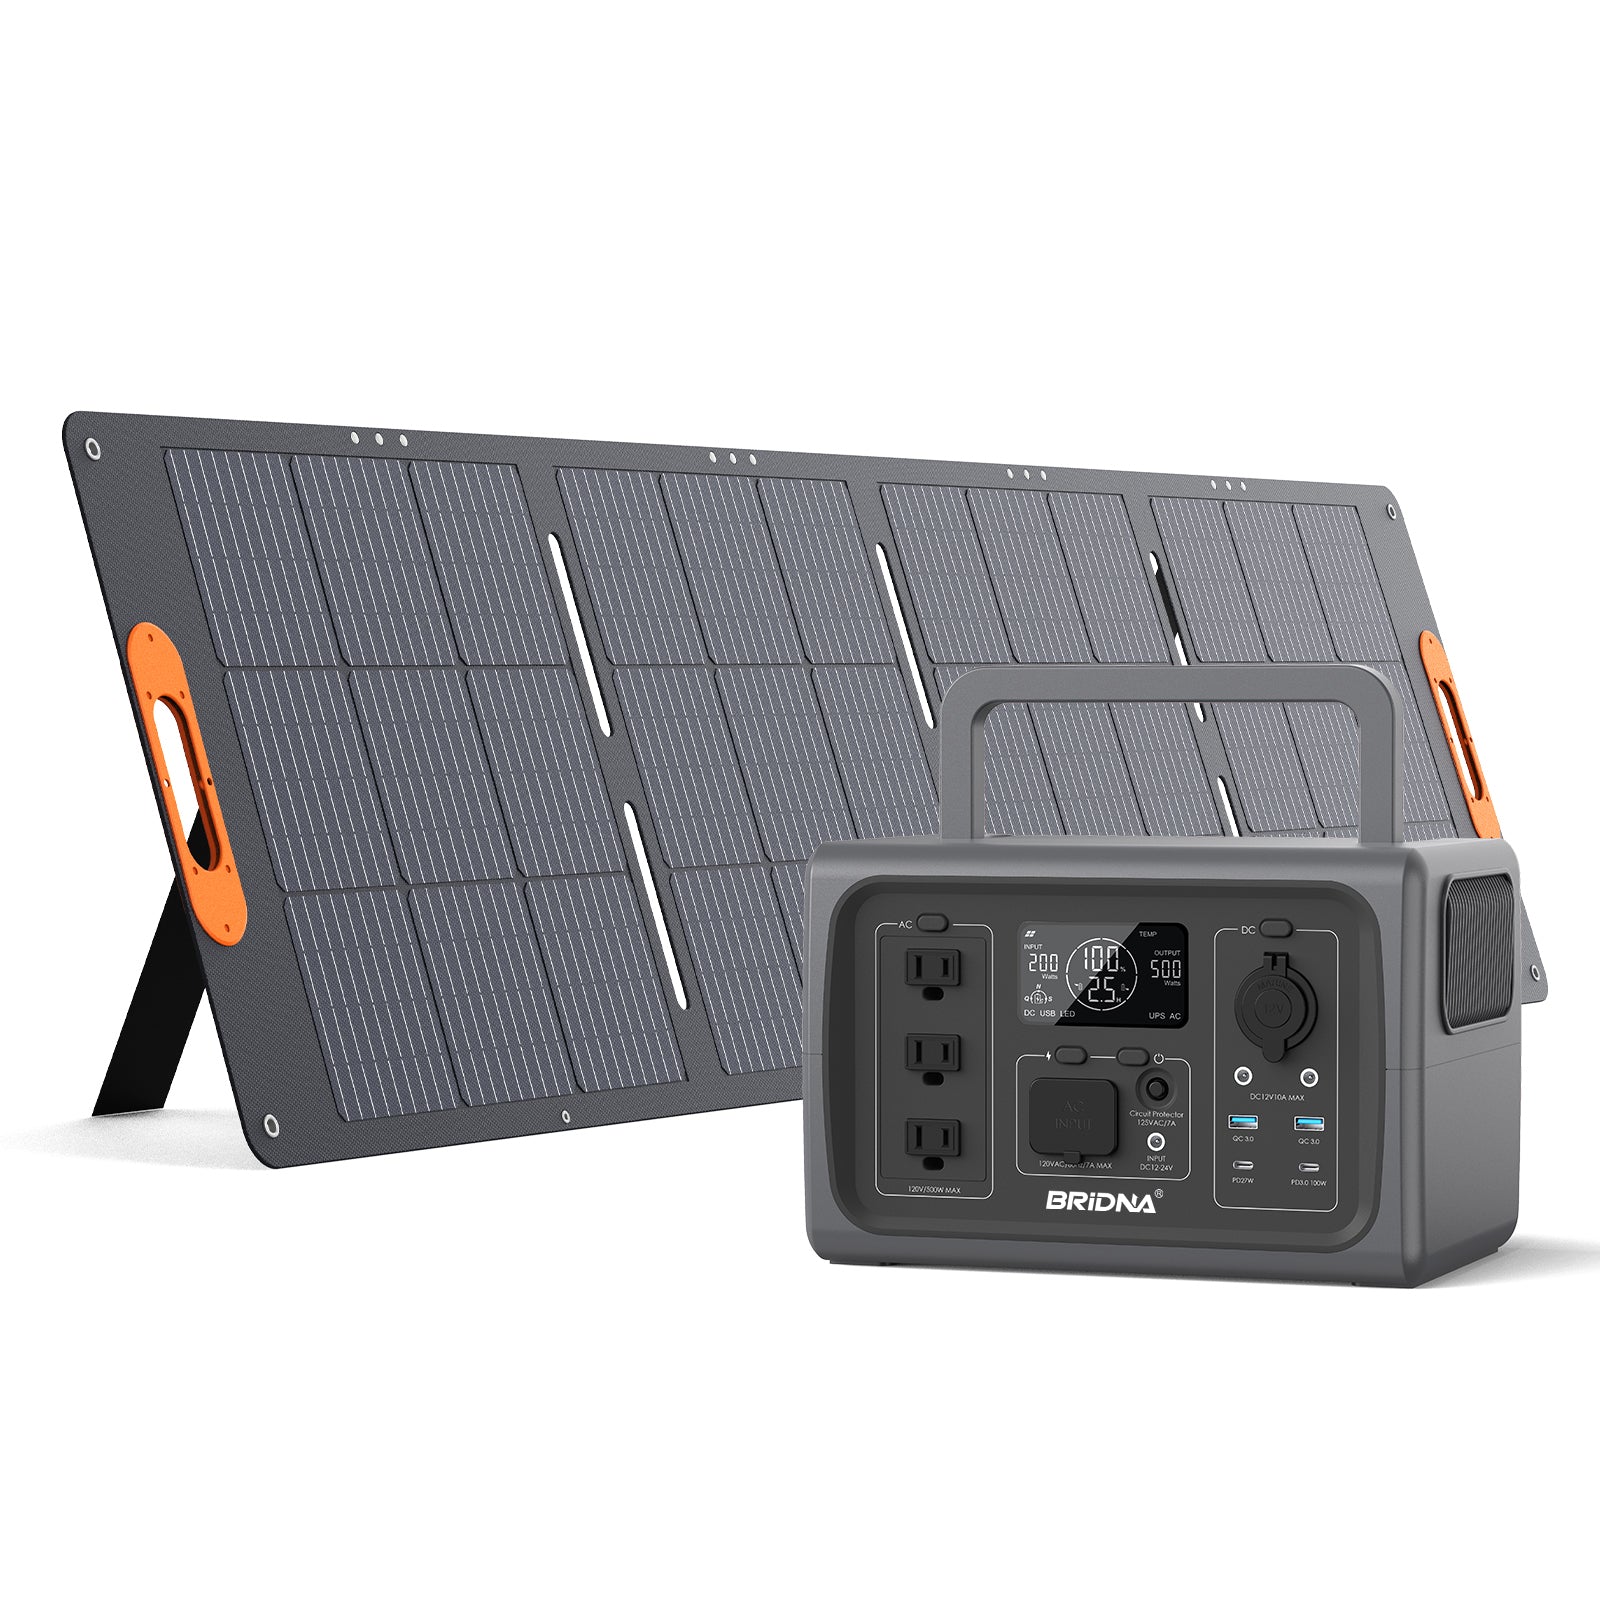 BRIDNA SP120 120W Solar Charging Panel with PPS600-5 500W Portable Power Station